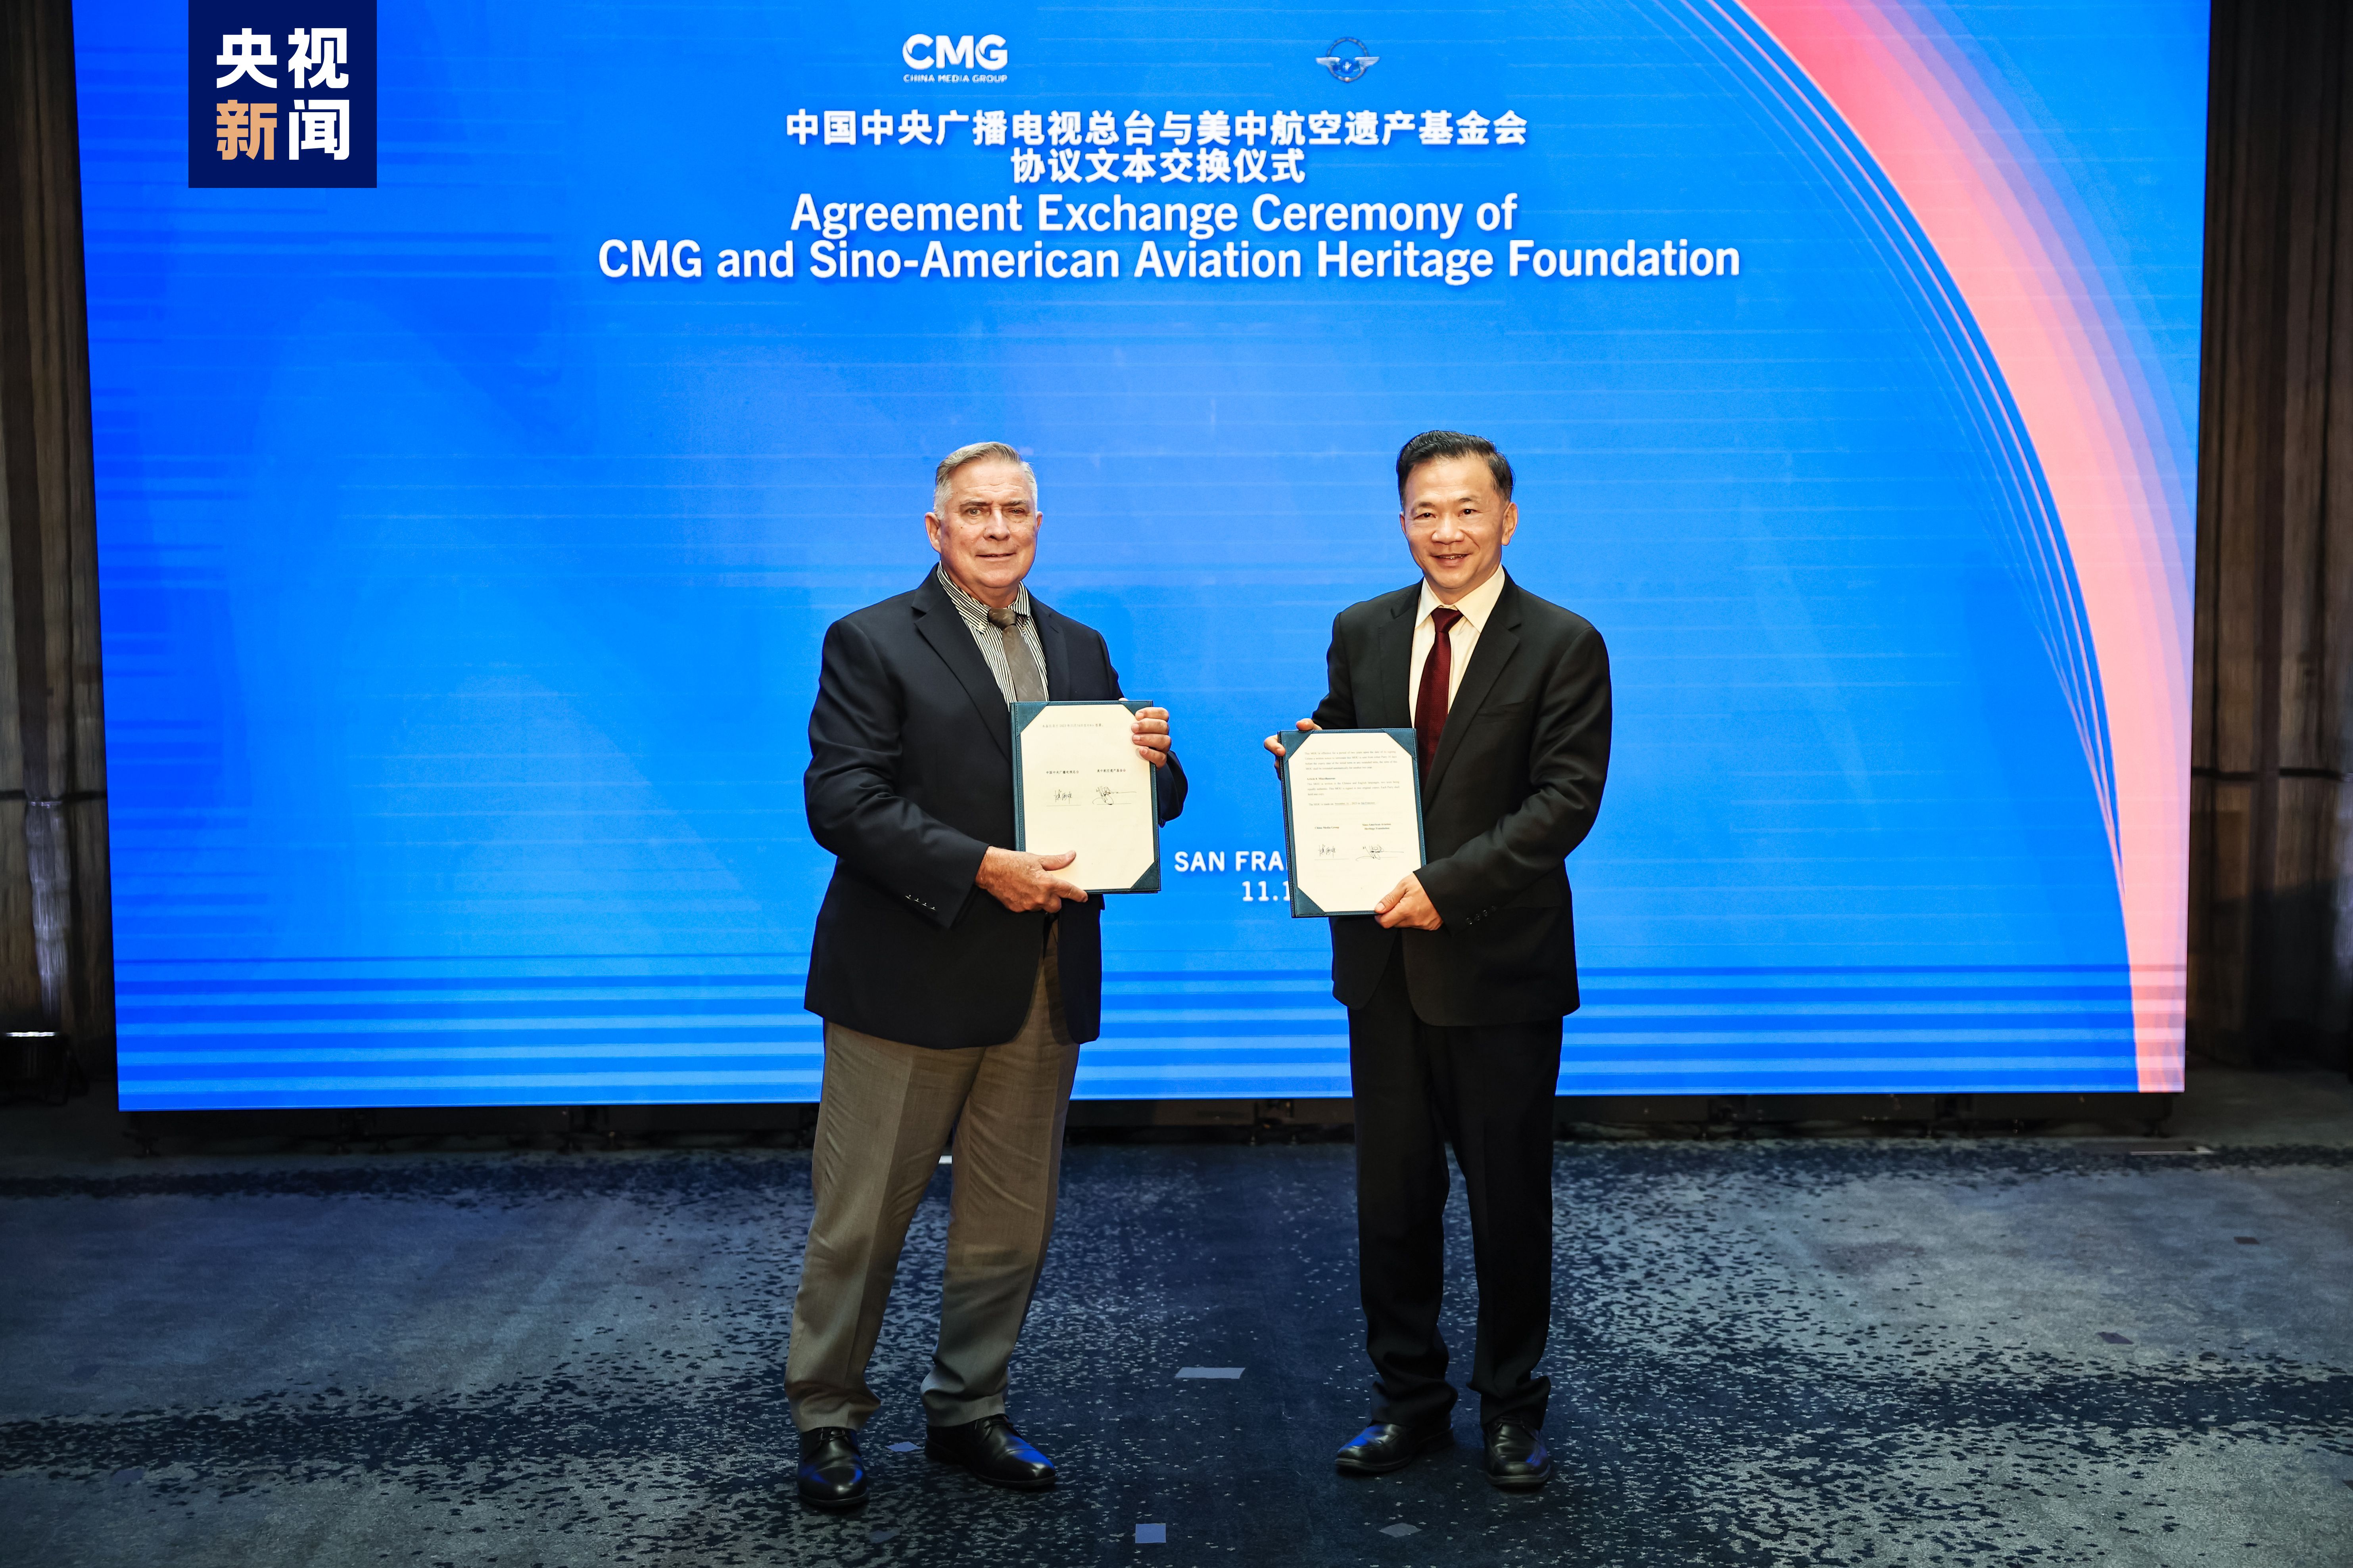 CMG exchanged agreements with the Sino-American Aviation Heritage Foundation at the event. /CMG